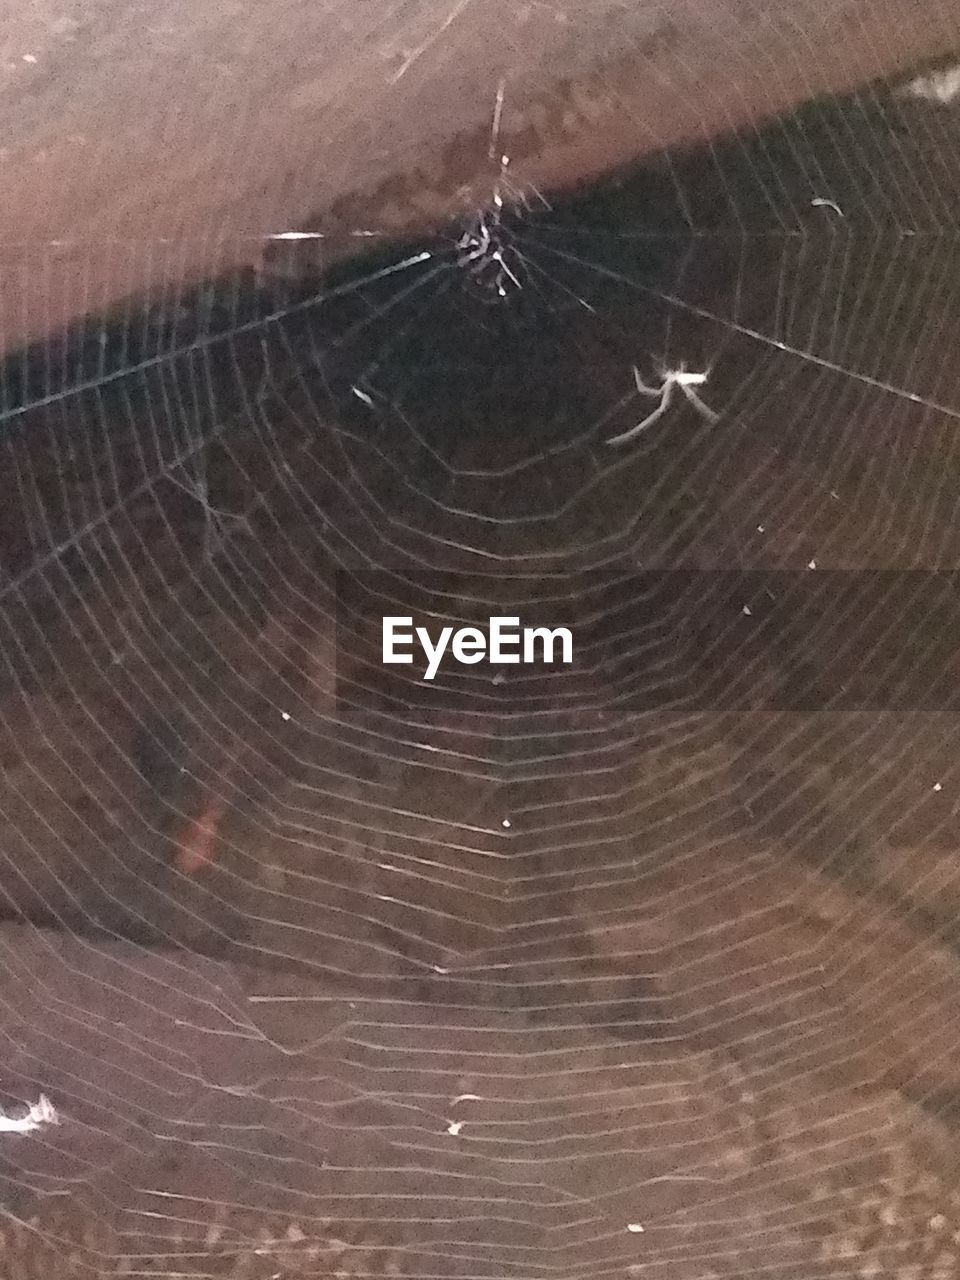 CLOSE-UP OF SPIDER WEB IN A FOREST